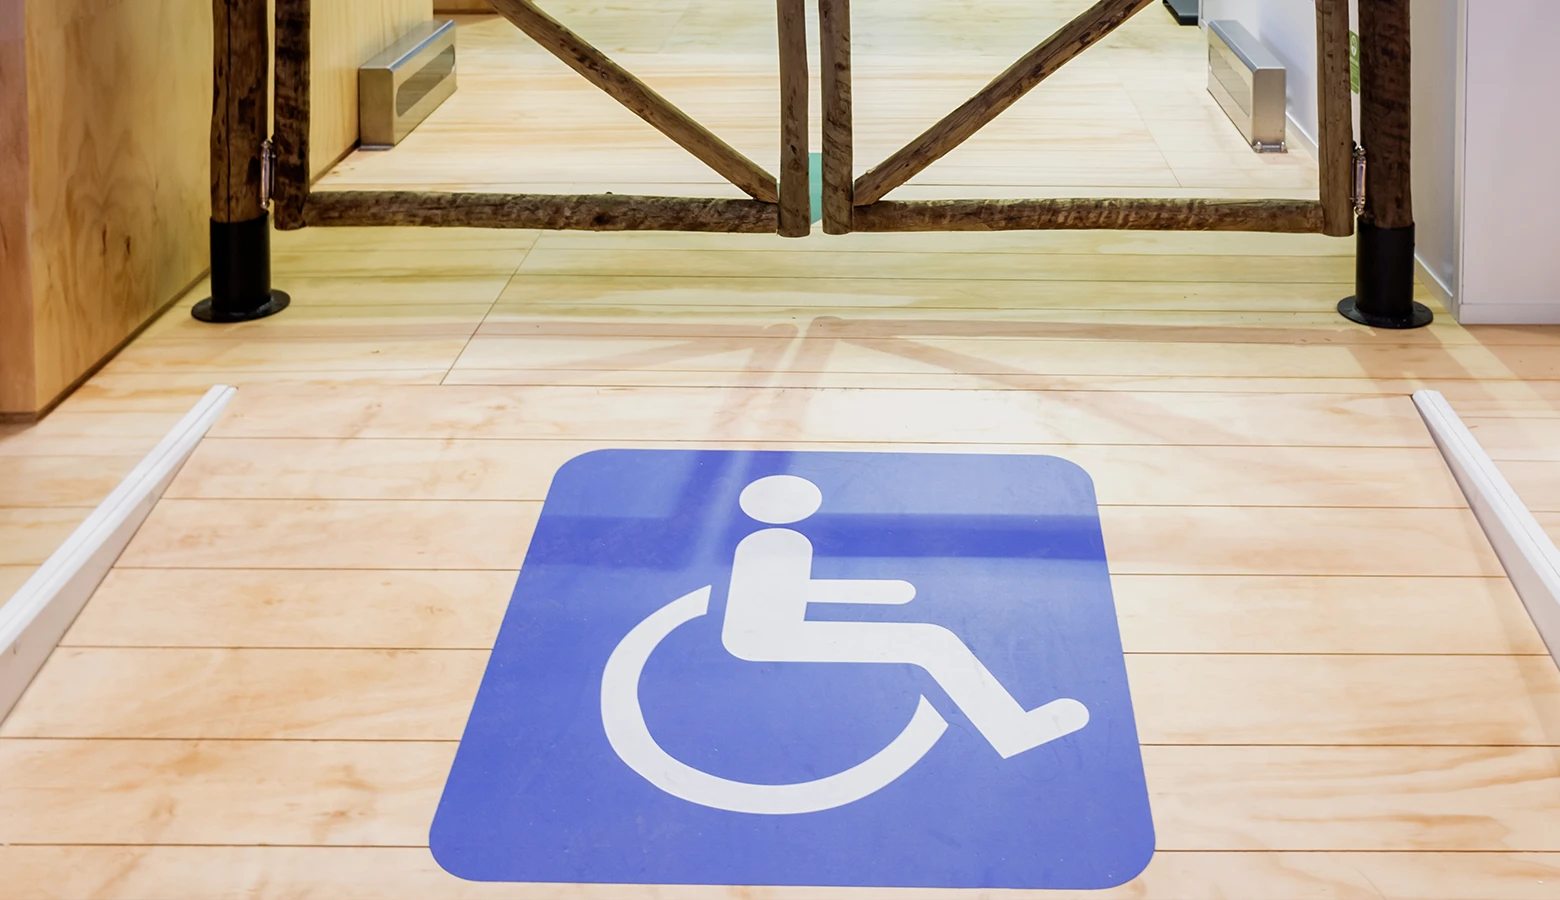 An international wheelchair symbol placed on a wooden floor in a room, indicating accessibility for individuals with disabilities.